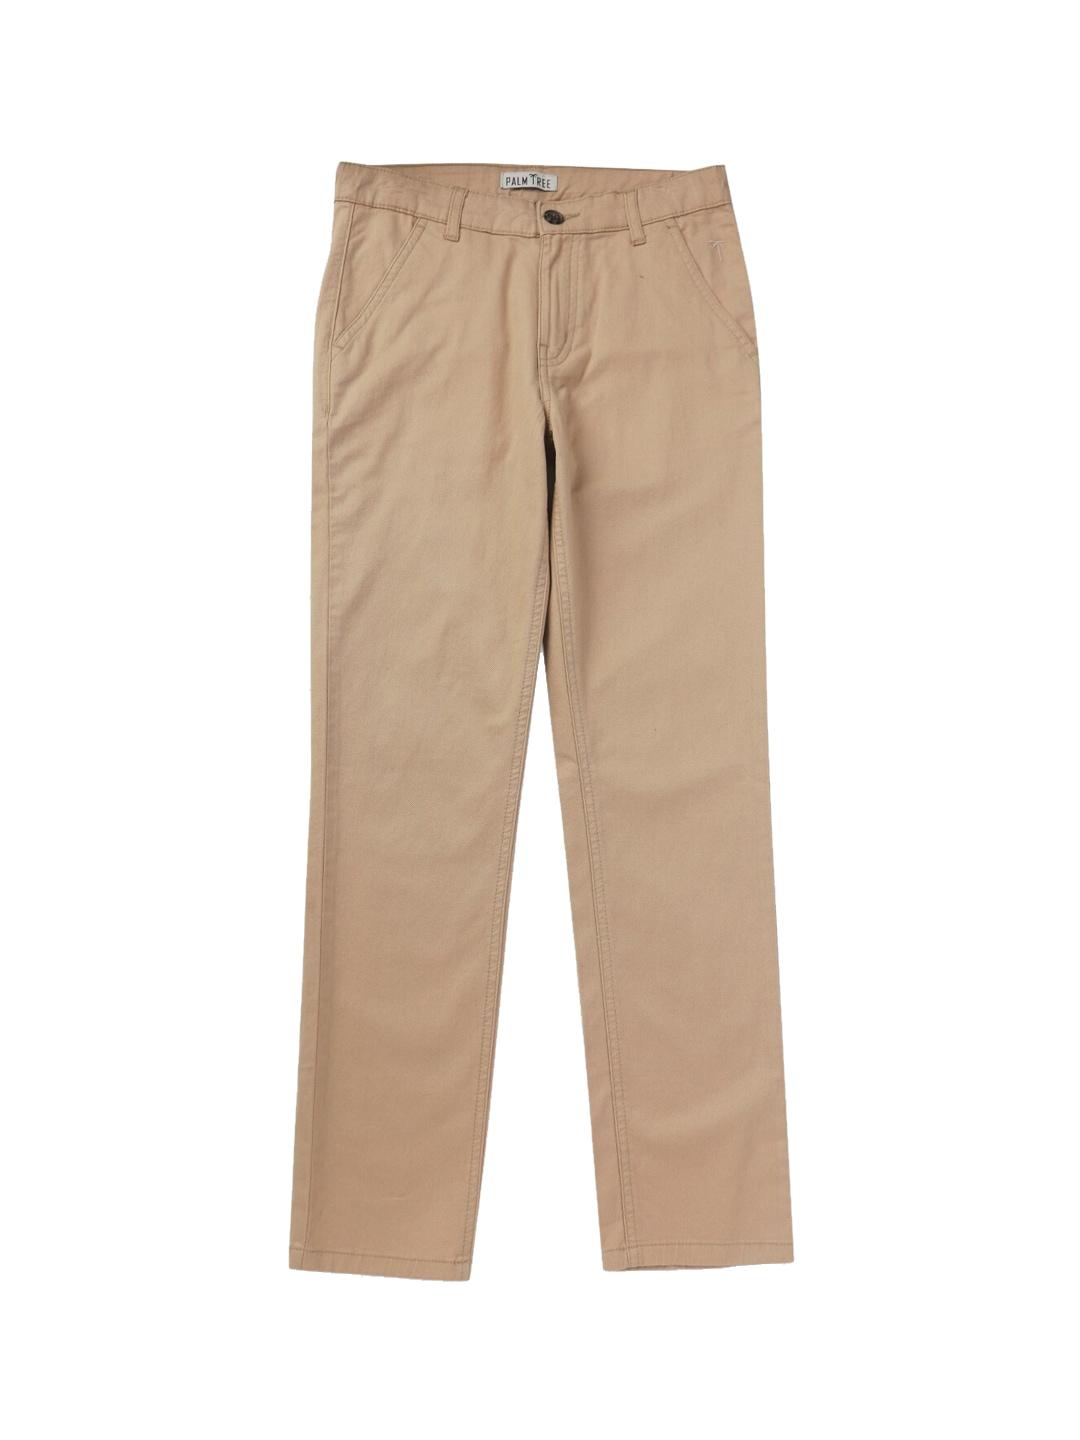 Palm Tree Boys Mid Rise Cotton Chinos Trousers